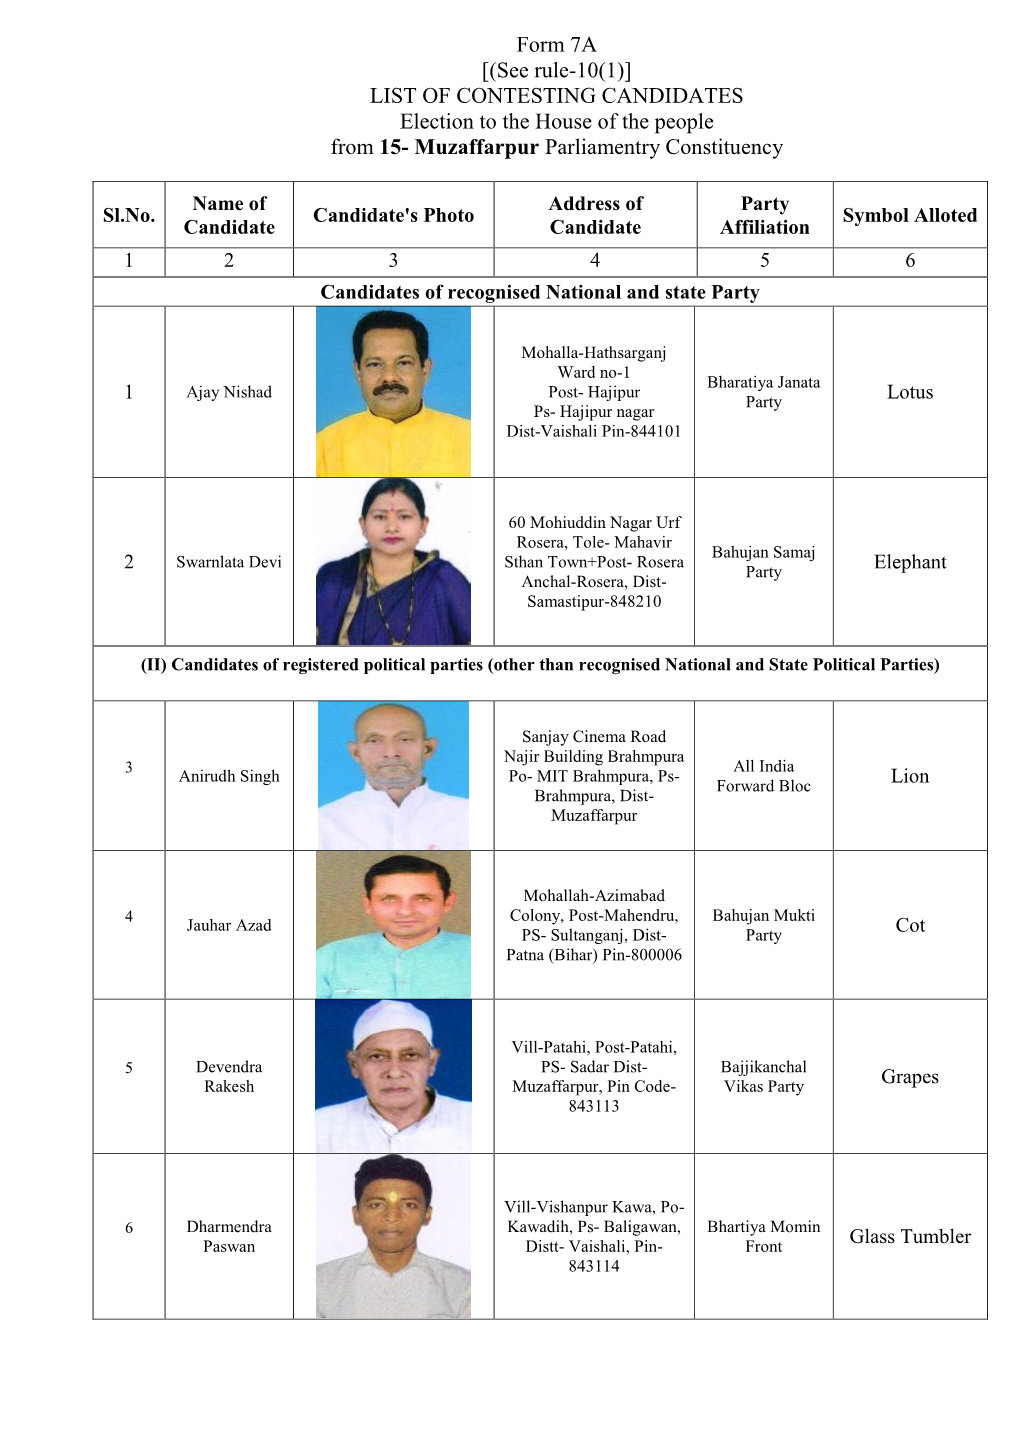 Form 7A [(See Rule-10(1)] LIST of CONTESTING CANDIDATES Election to the House of the People from 15- Muzaffarpur Parliamentry Constituency